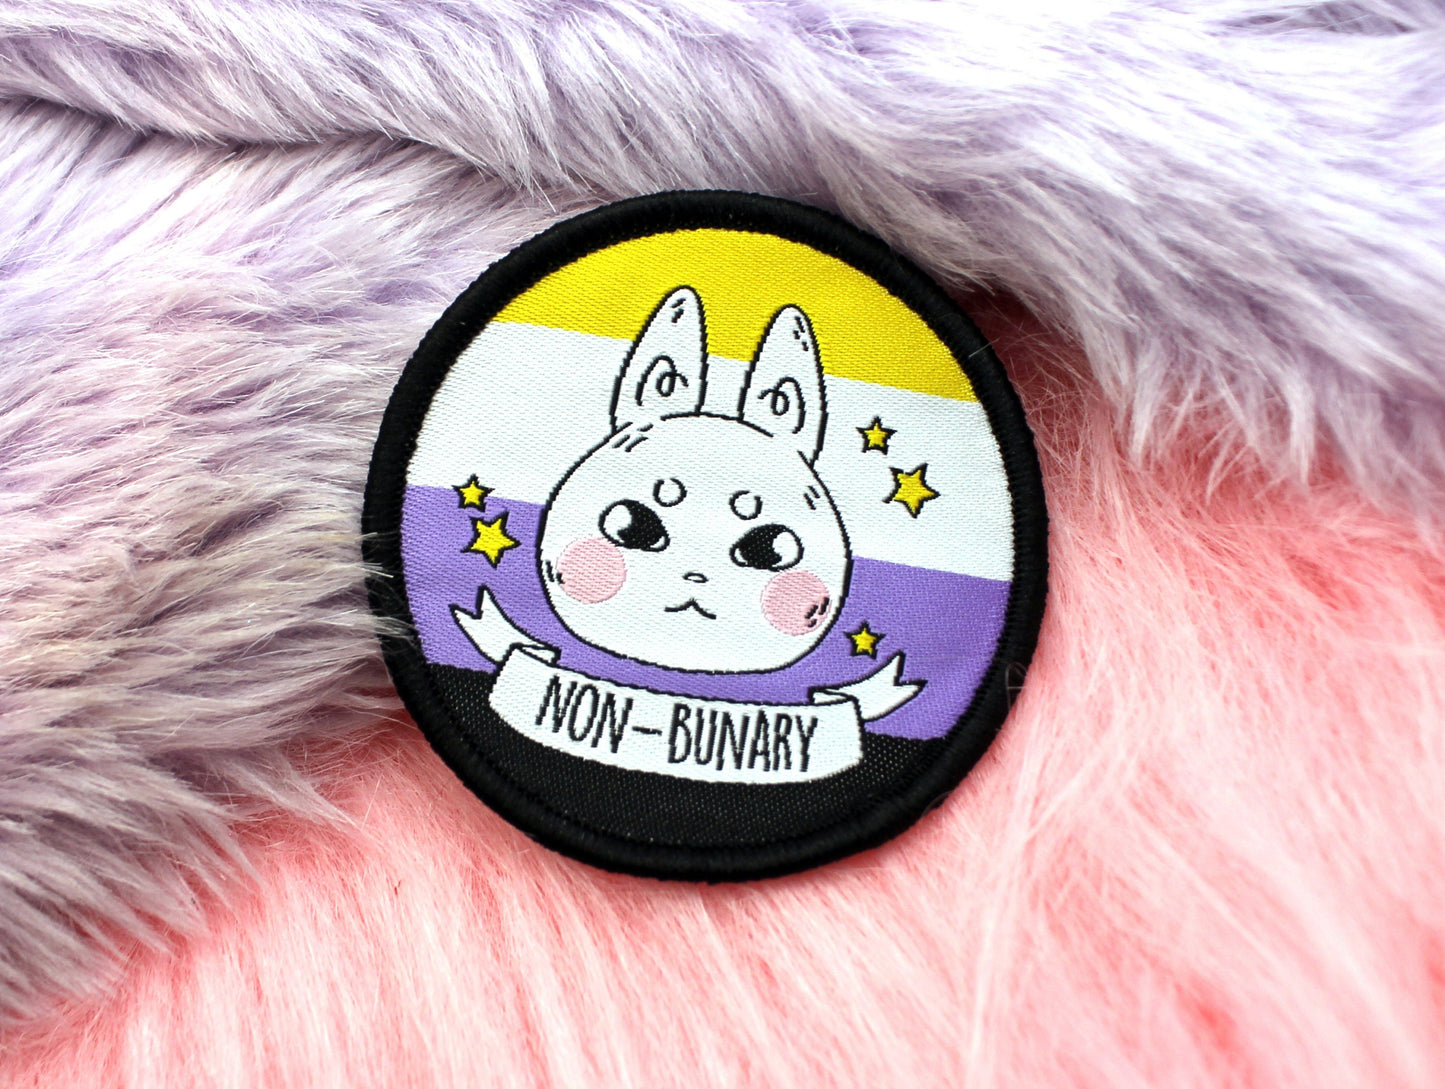 Non-Bunary Iron-On Patch (60mm) - non-binary bunny rabbit embroidered patch